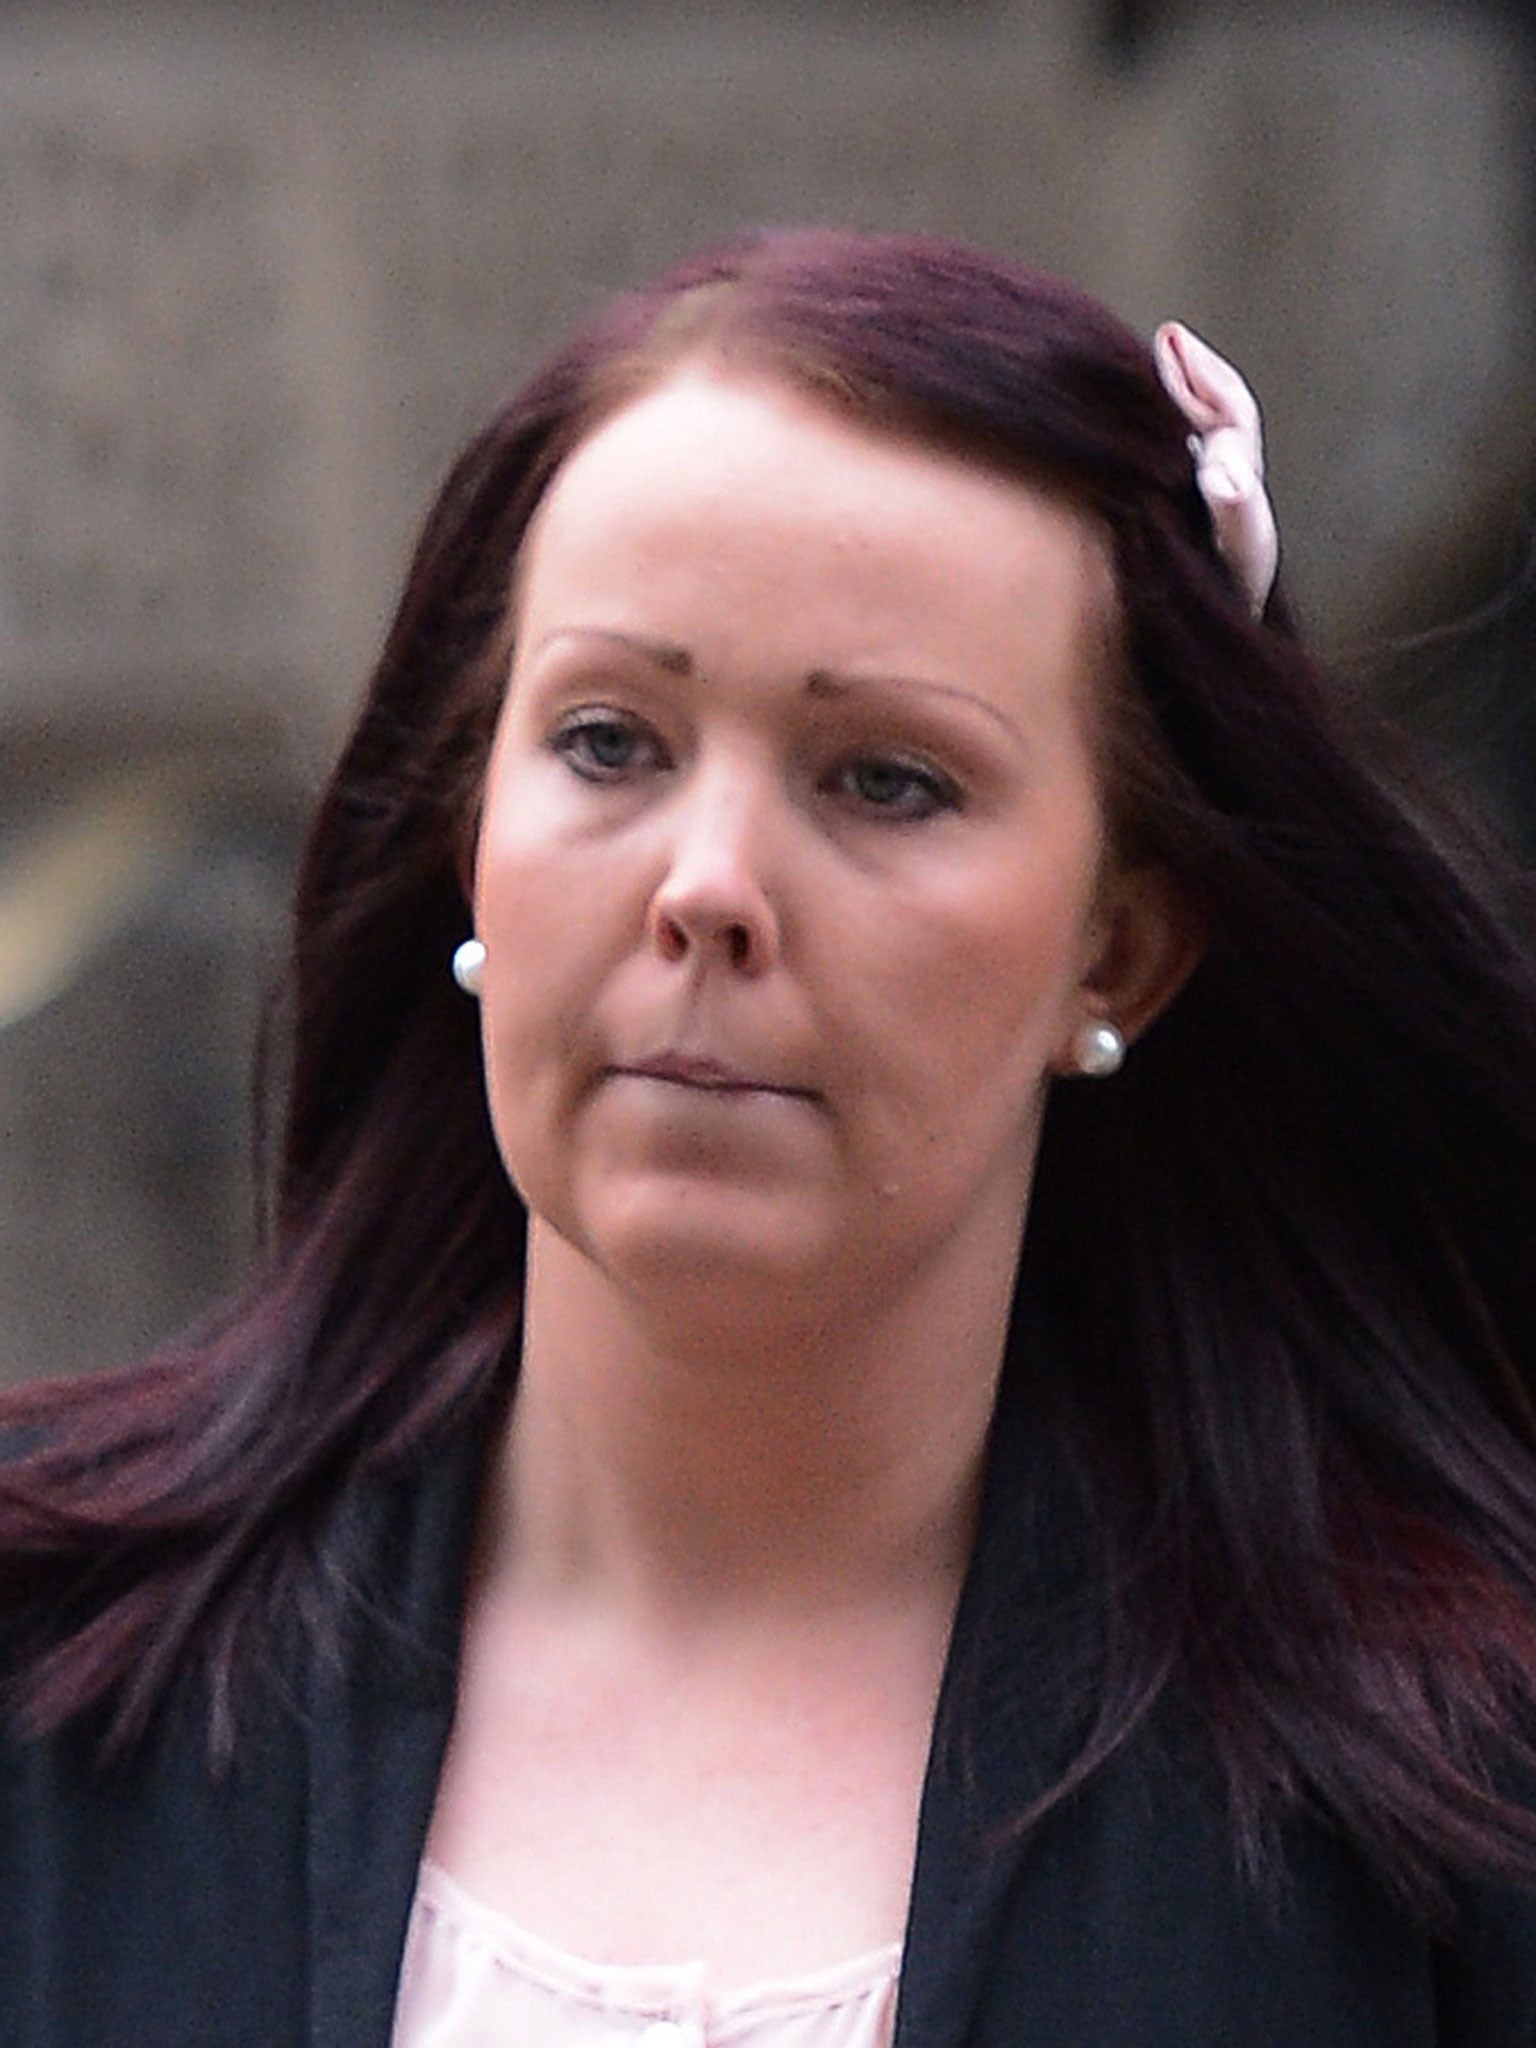 Rebecca Leighton, 29, spent six weeks in custody after being charged in July 2011